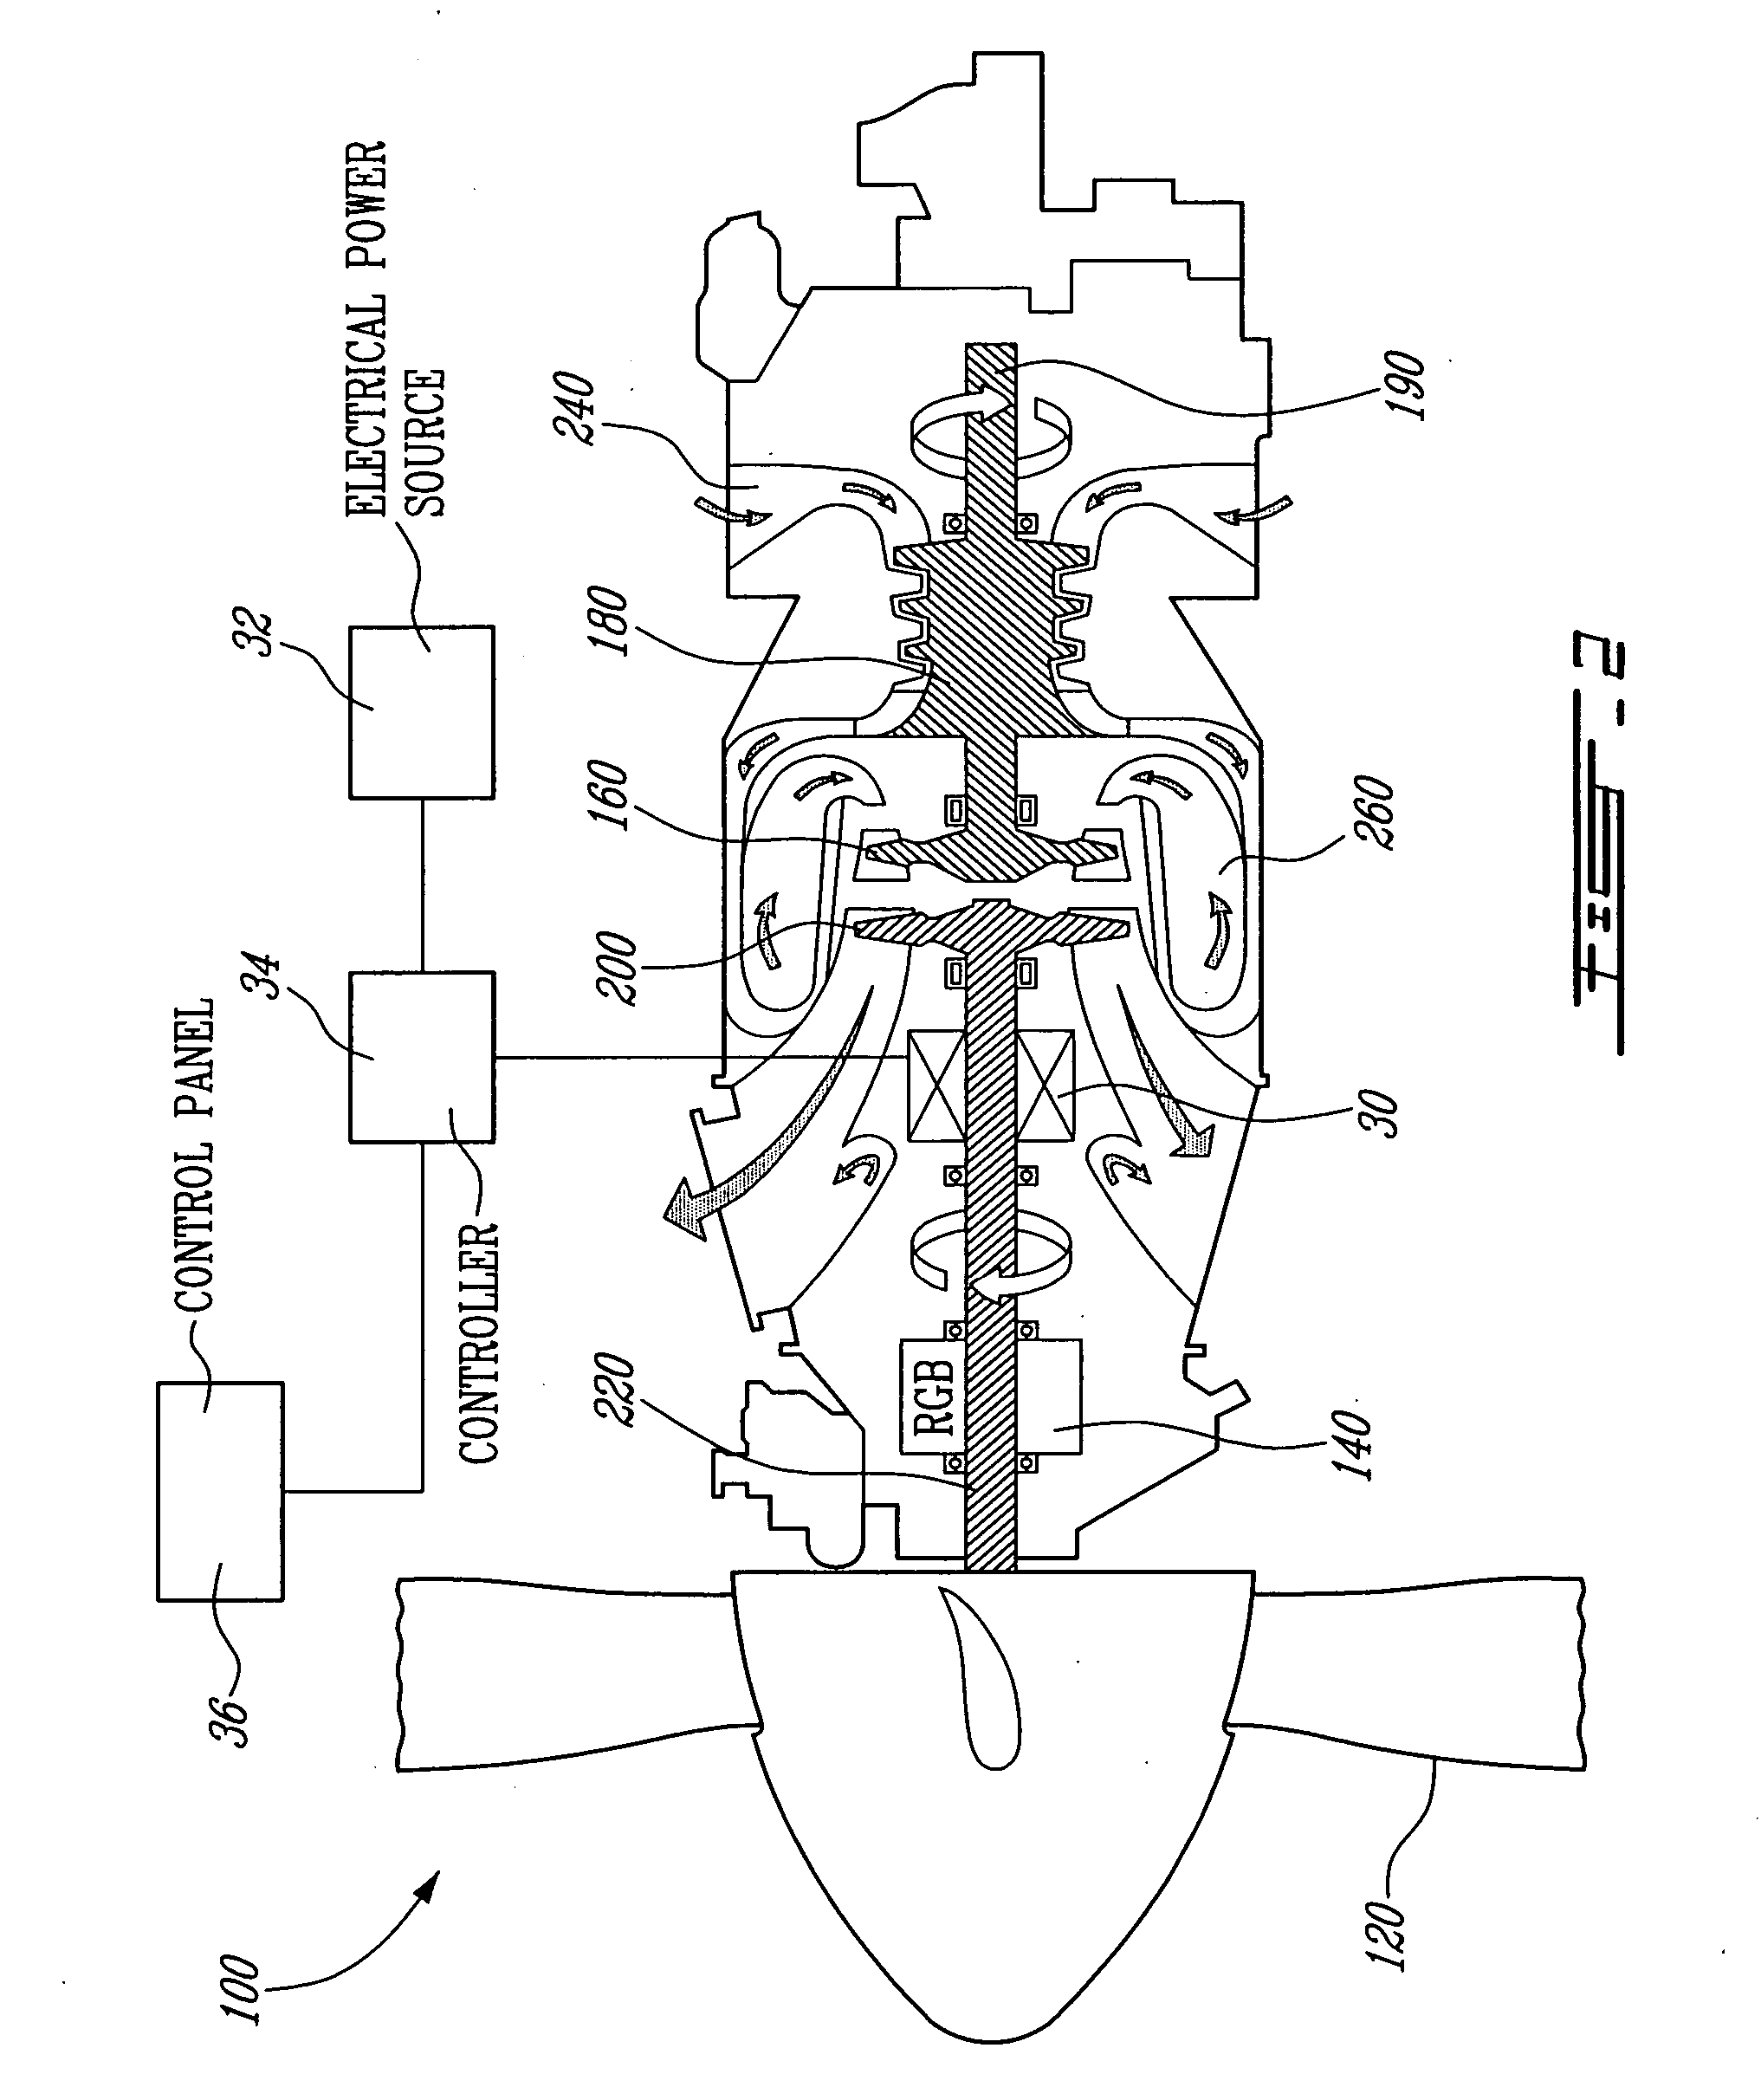 Method and system for taxiing an aircraft